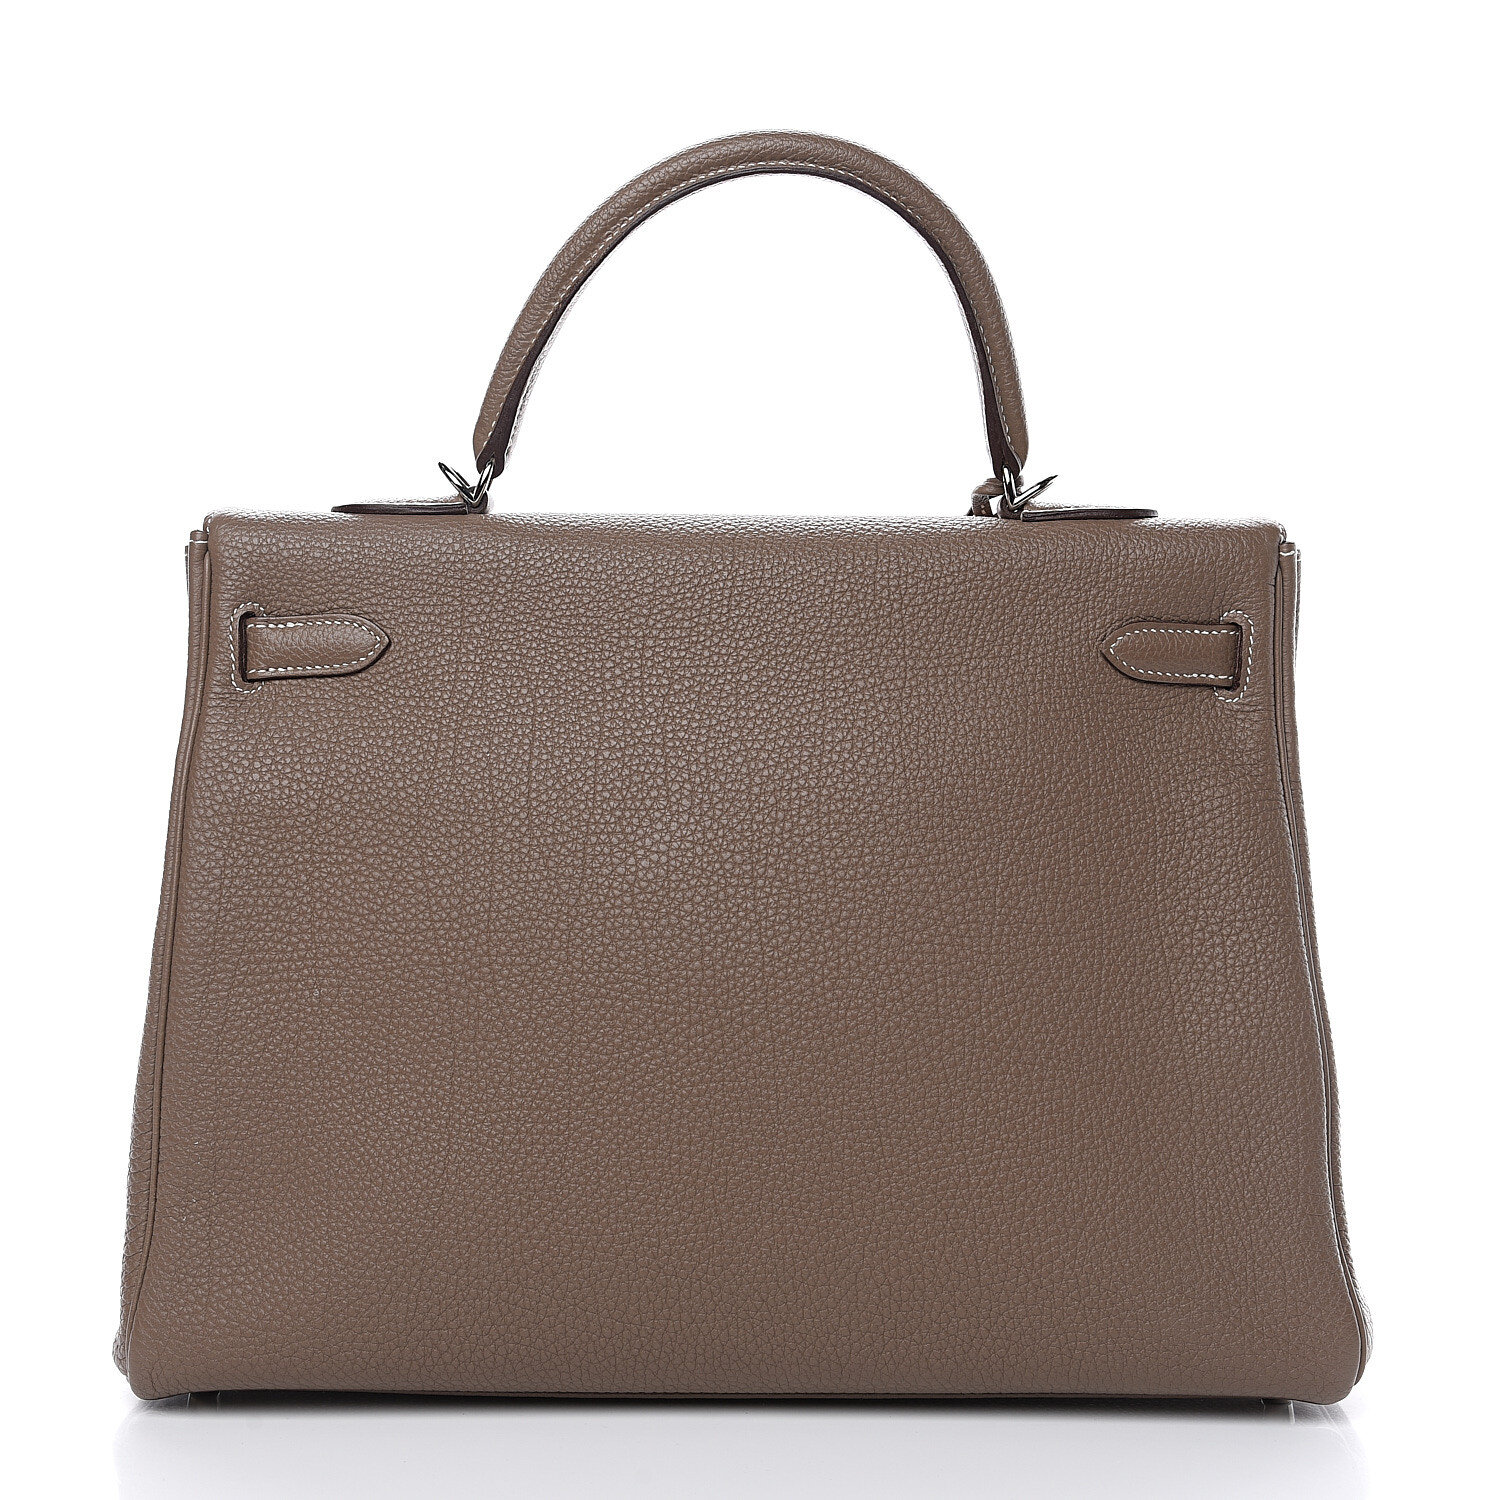 hermes-togo-kelly-retourne-35-etoupe-Available-For-Sale-Collecting-Luxury-4.jpg